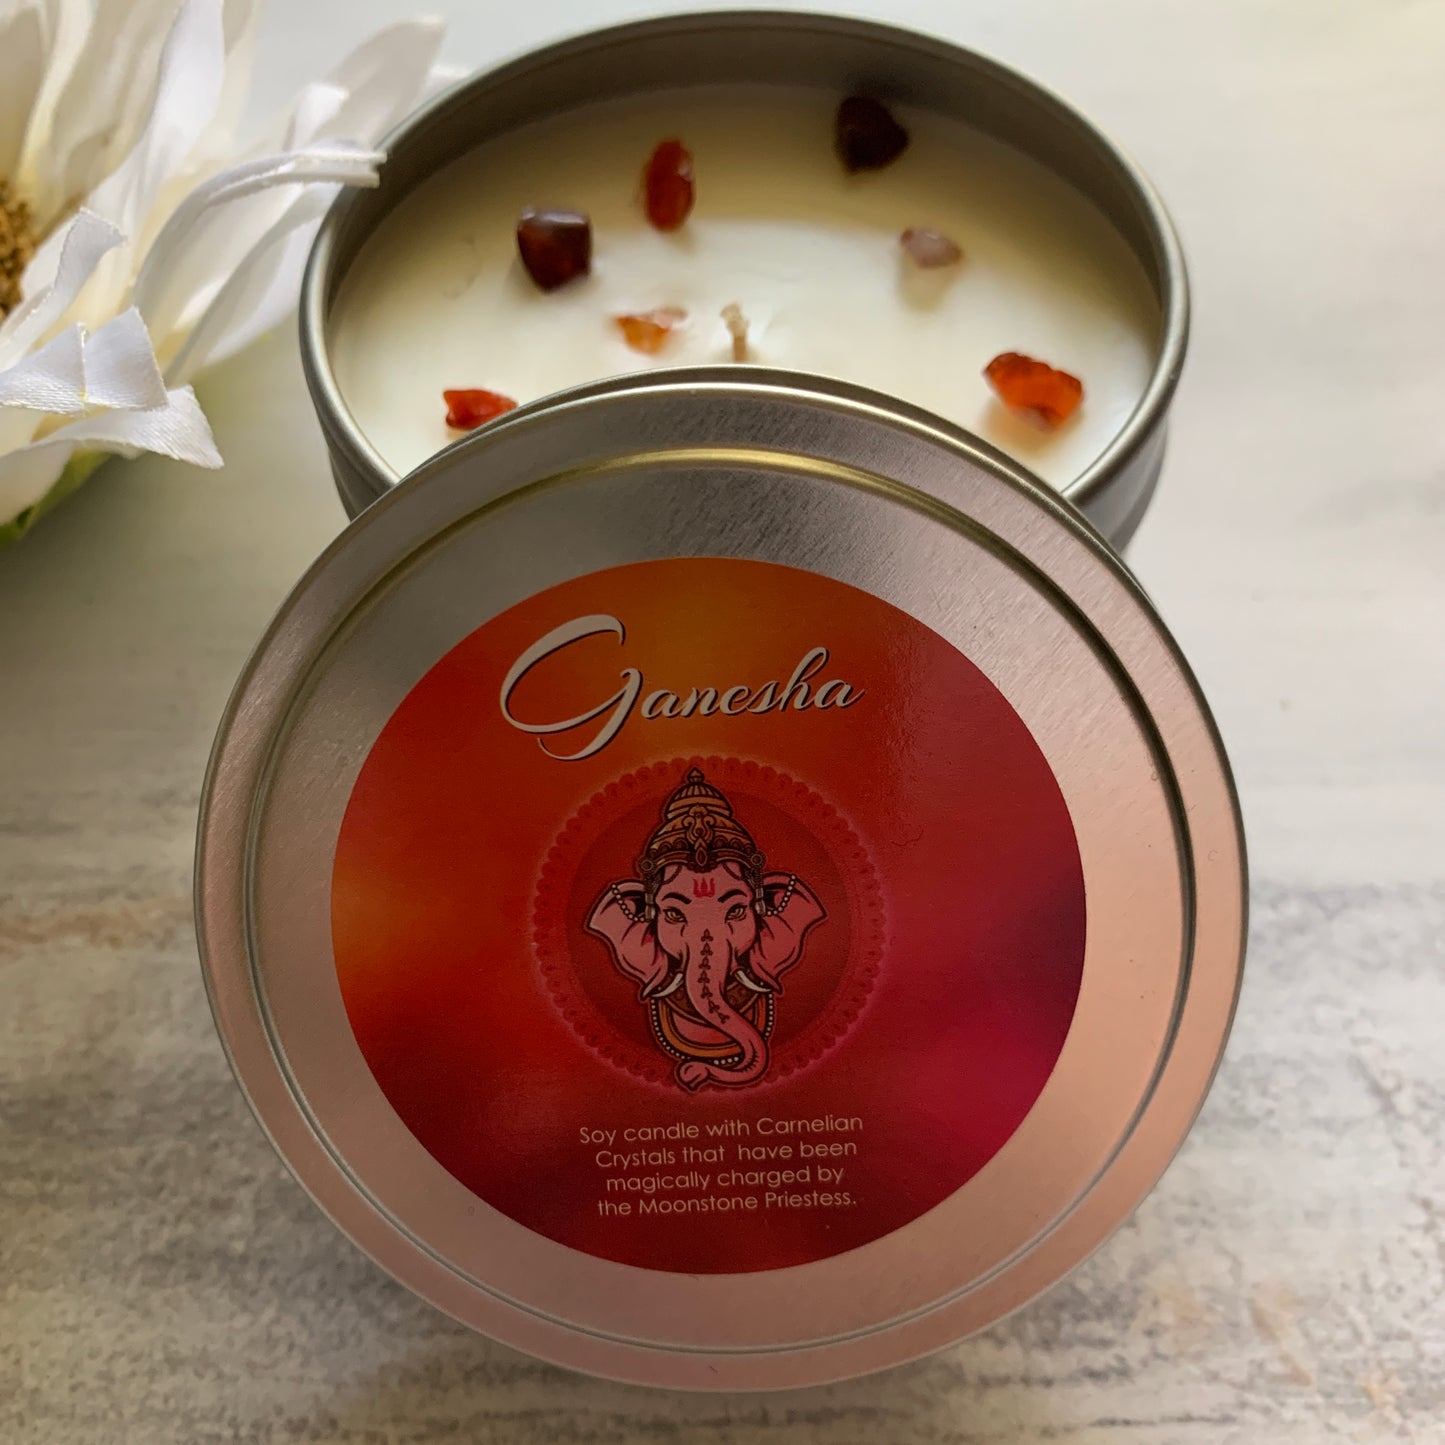 Ganesh Obstacle Remover Candle with Carnelian Crystals